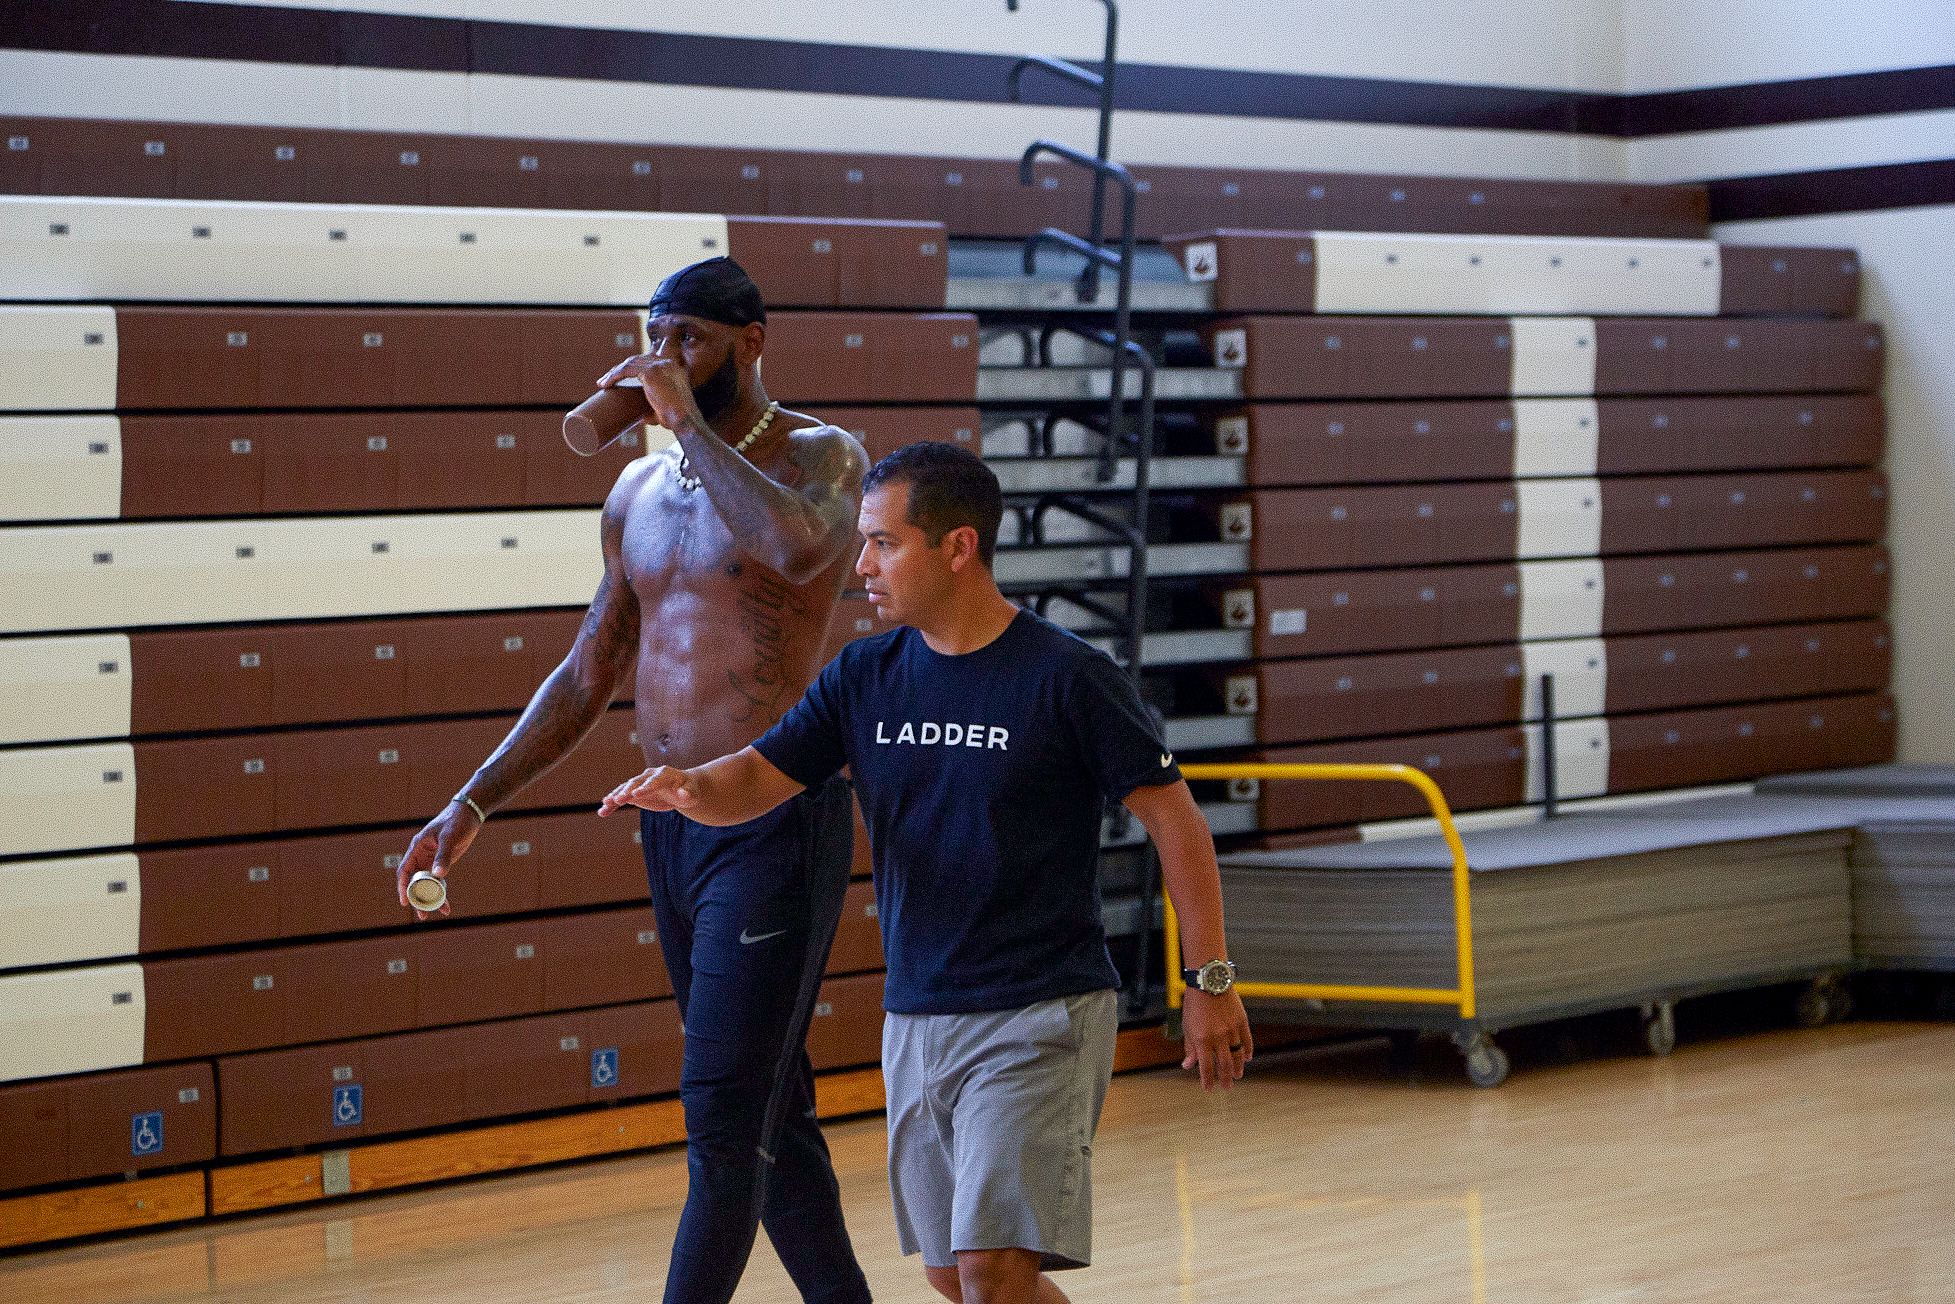 Lebron James drinking a nutrition supplement along with a trainer in a t-shirt that has the “Ladder” logo. 